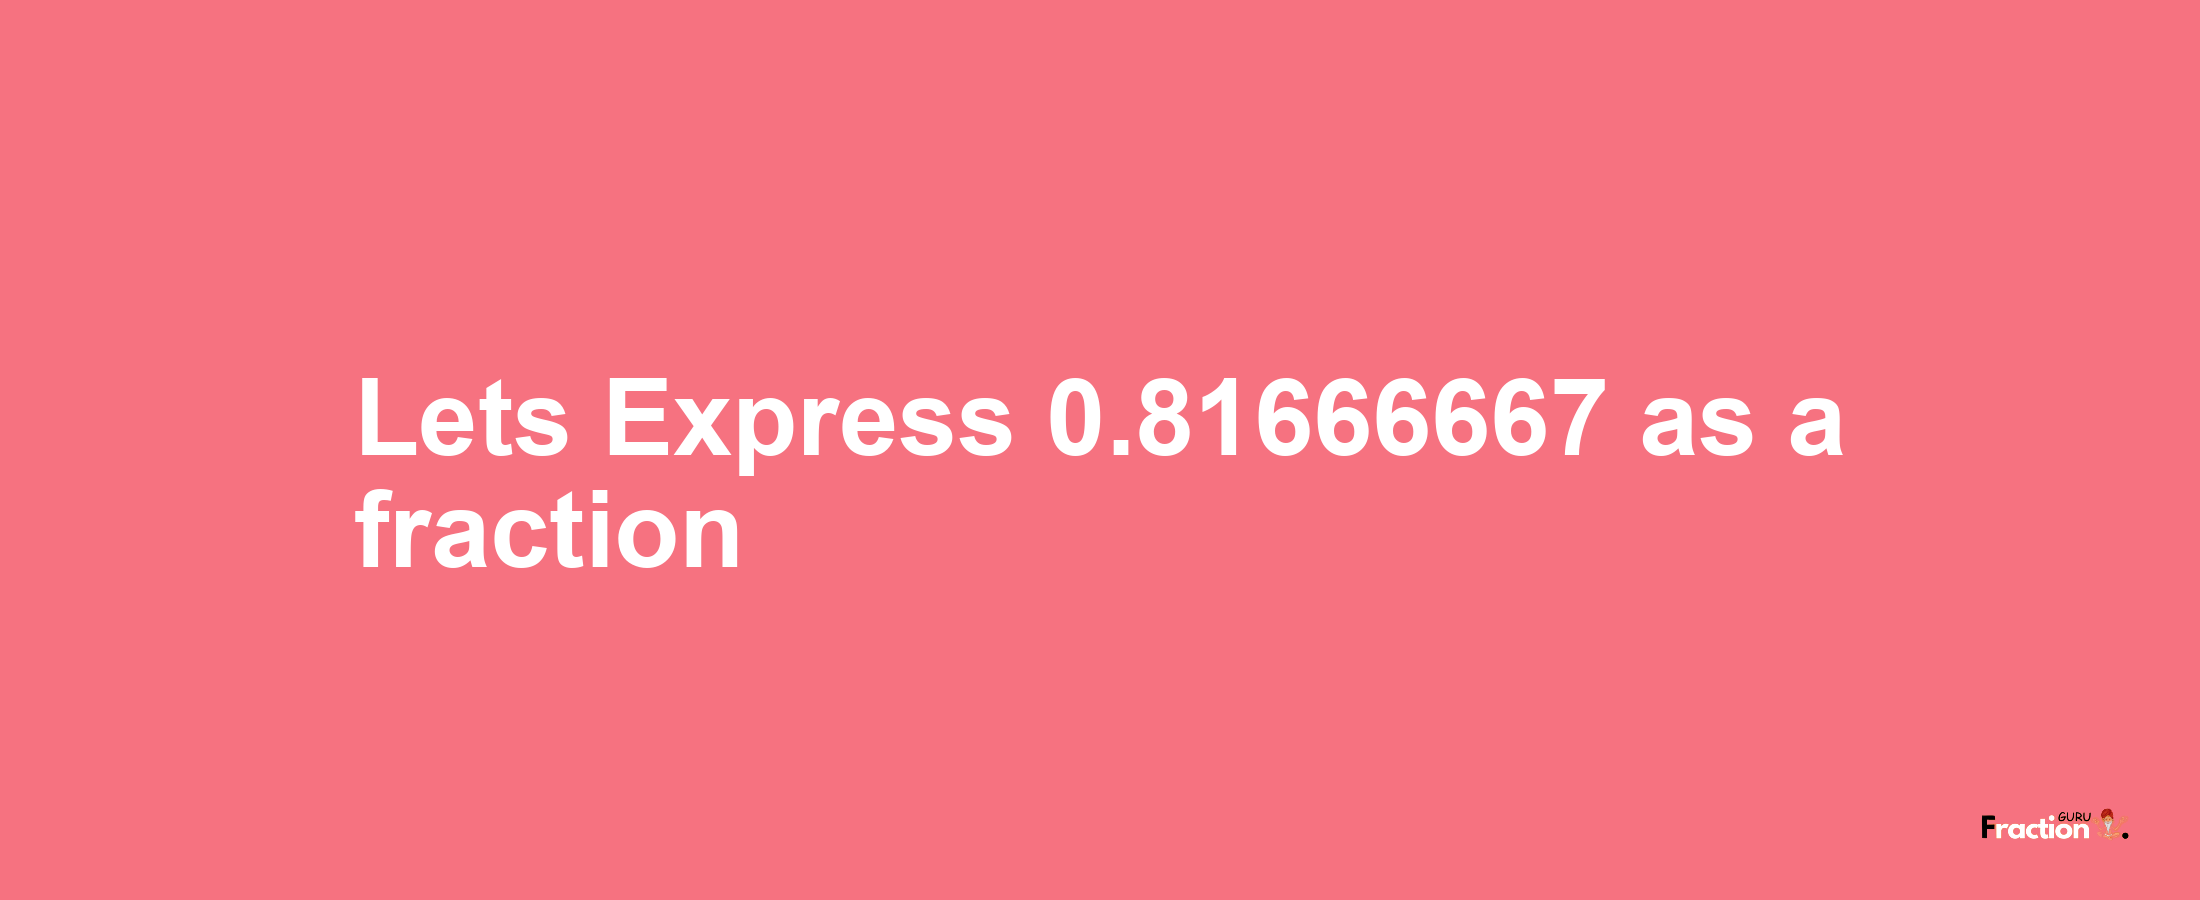 Lets Express 0.81666667 as afraction